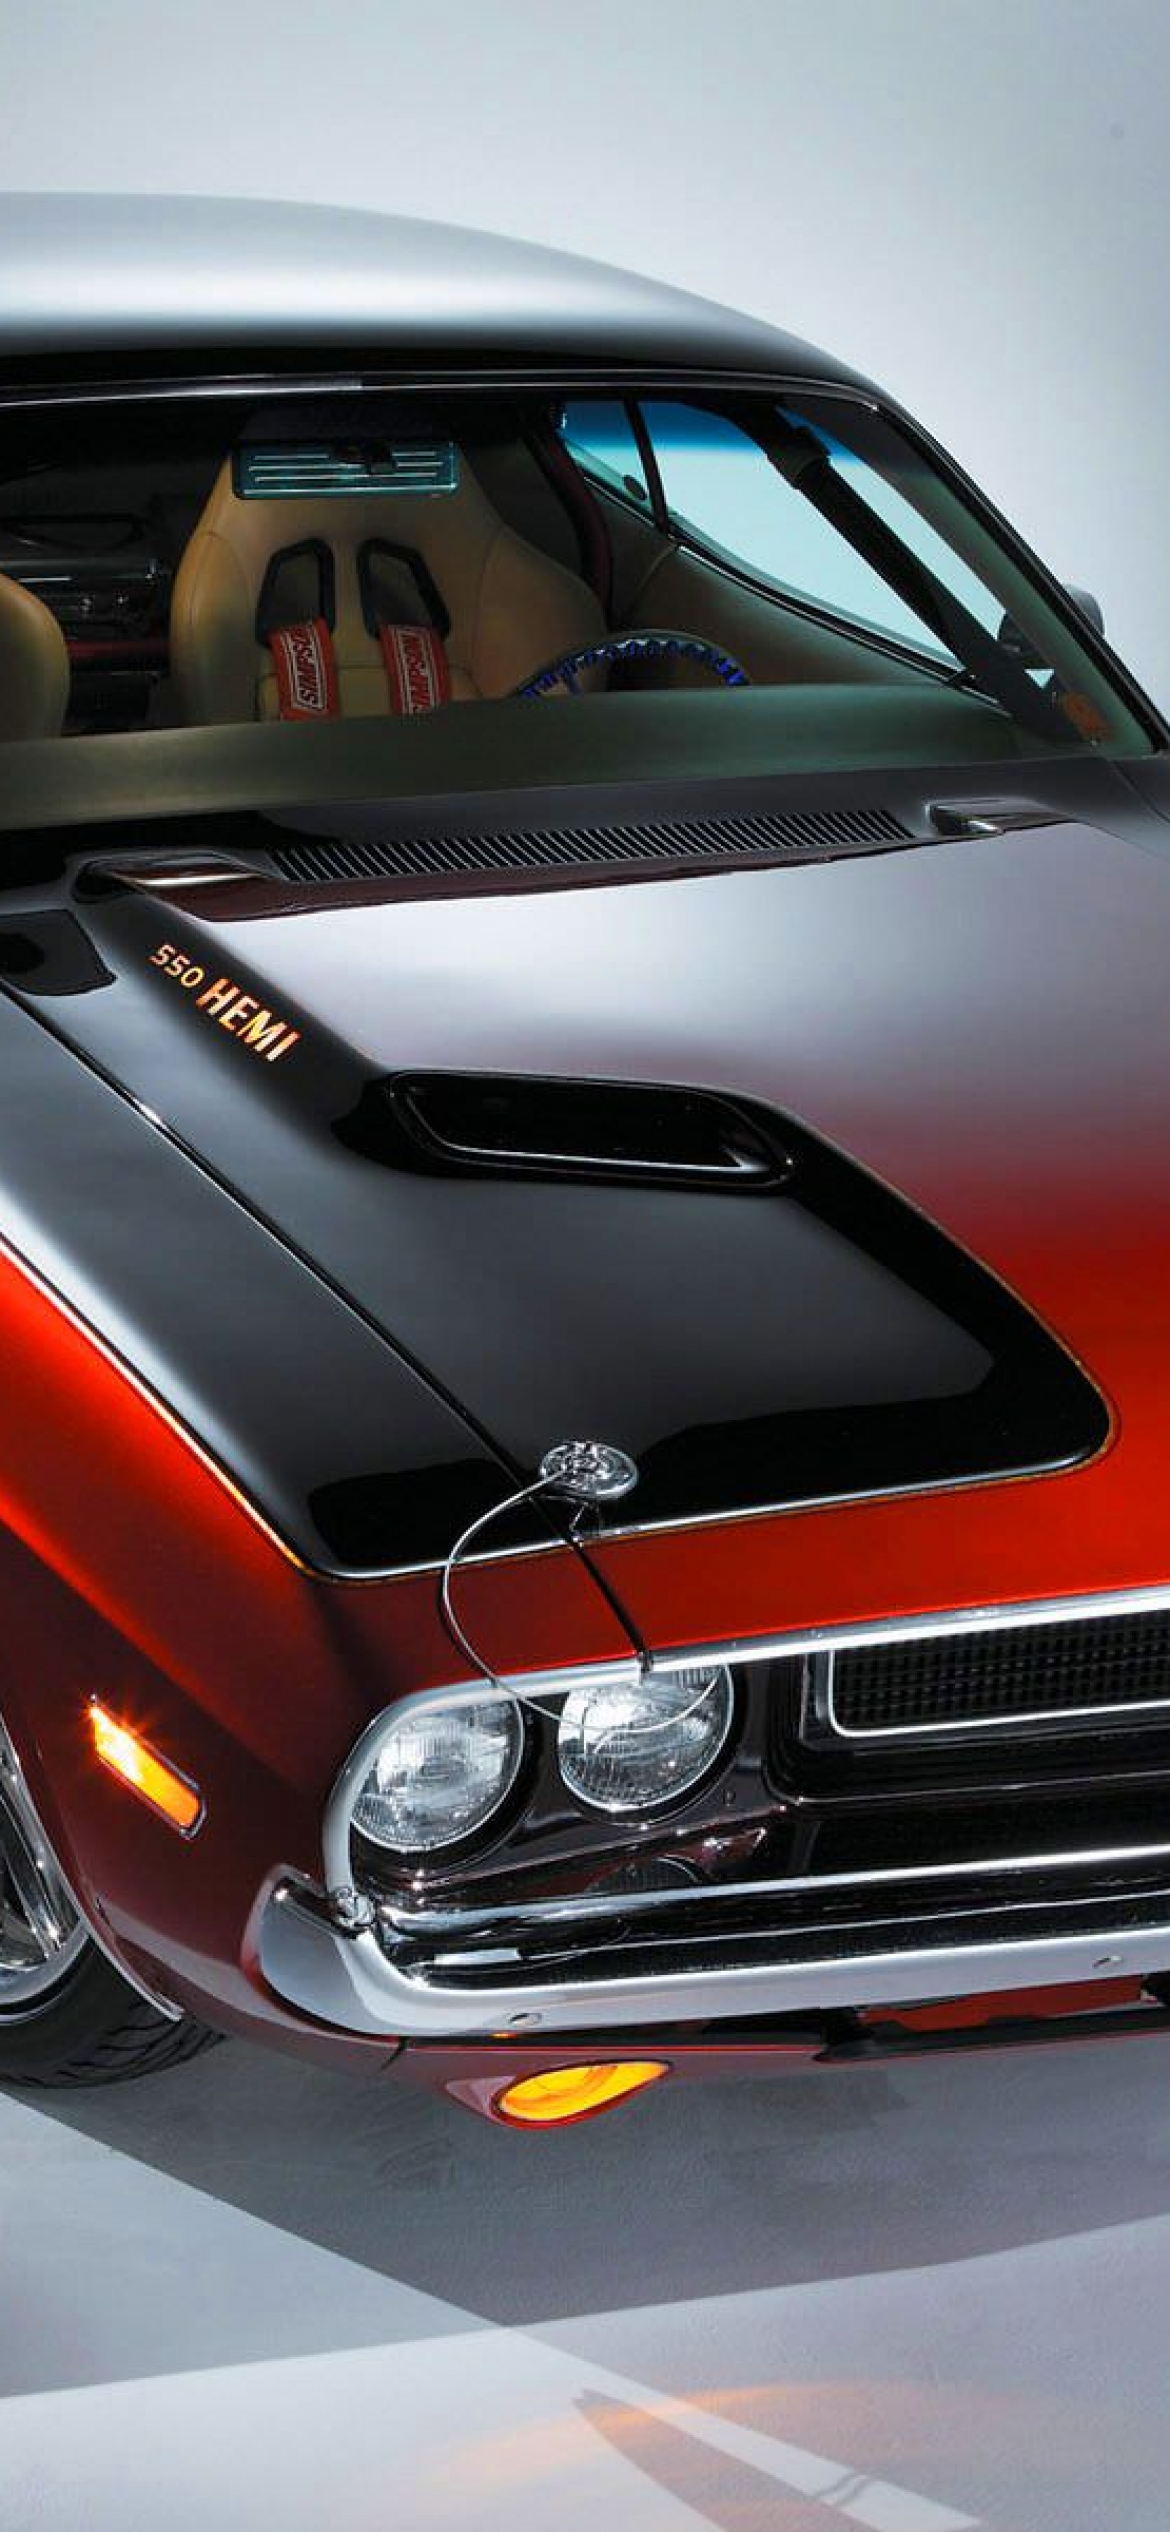 1970 Dodge Charger Wallpaper HD 76 images